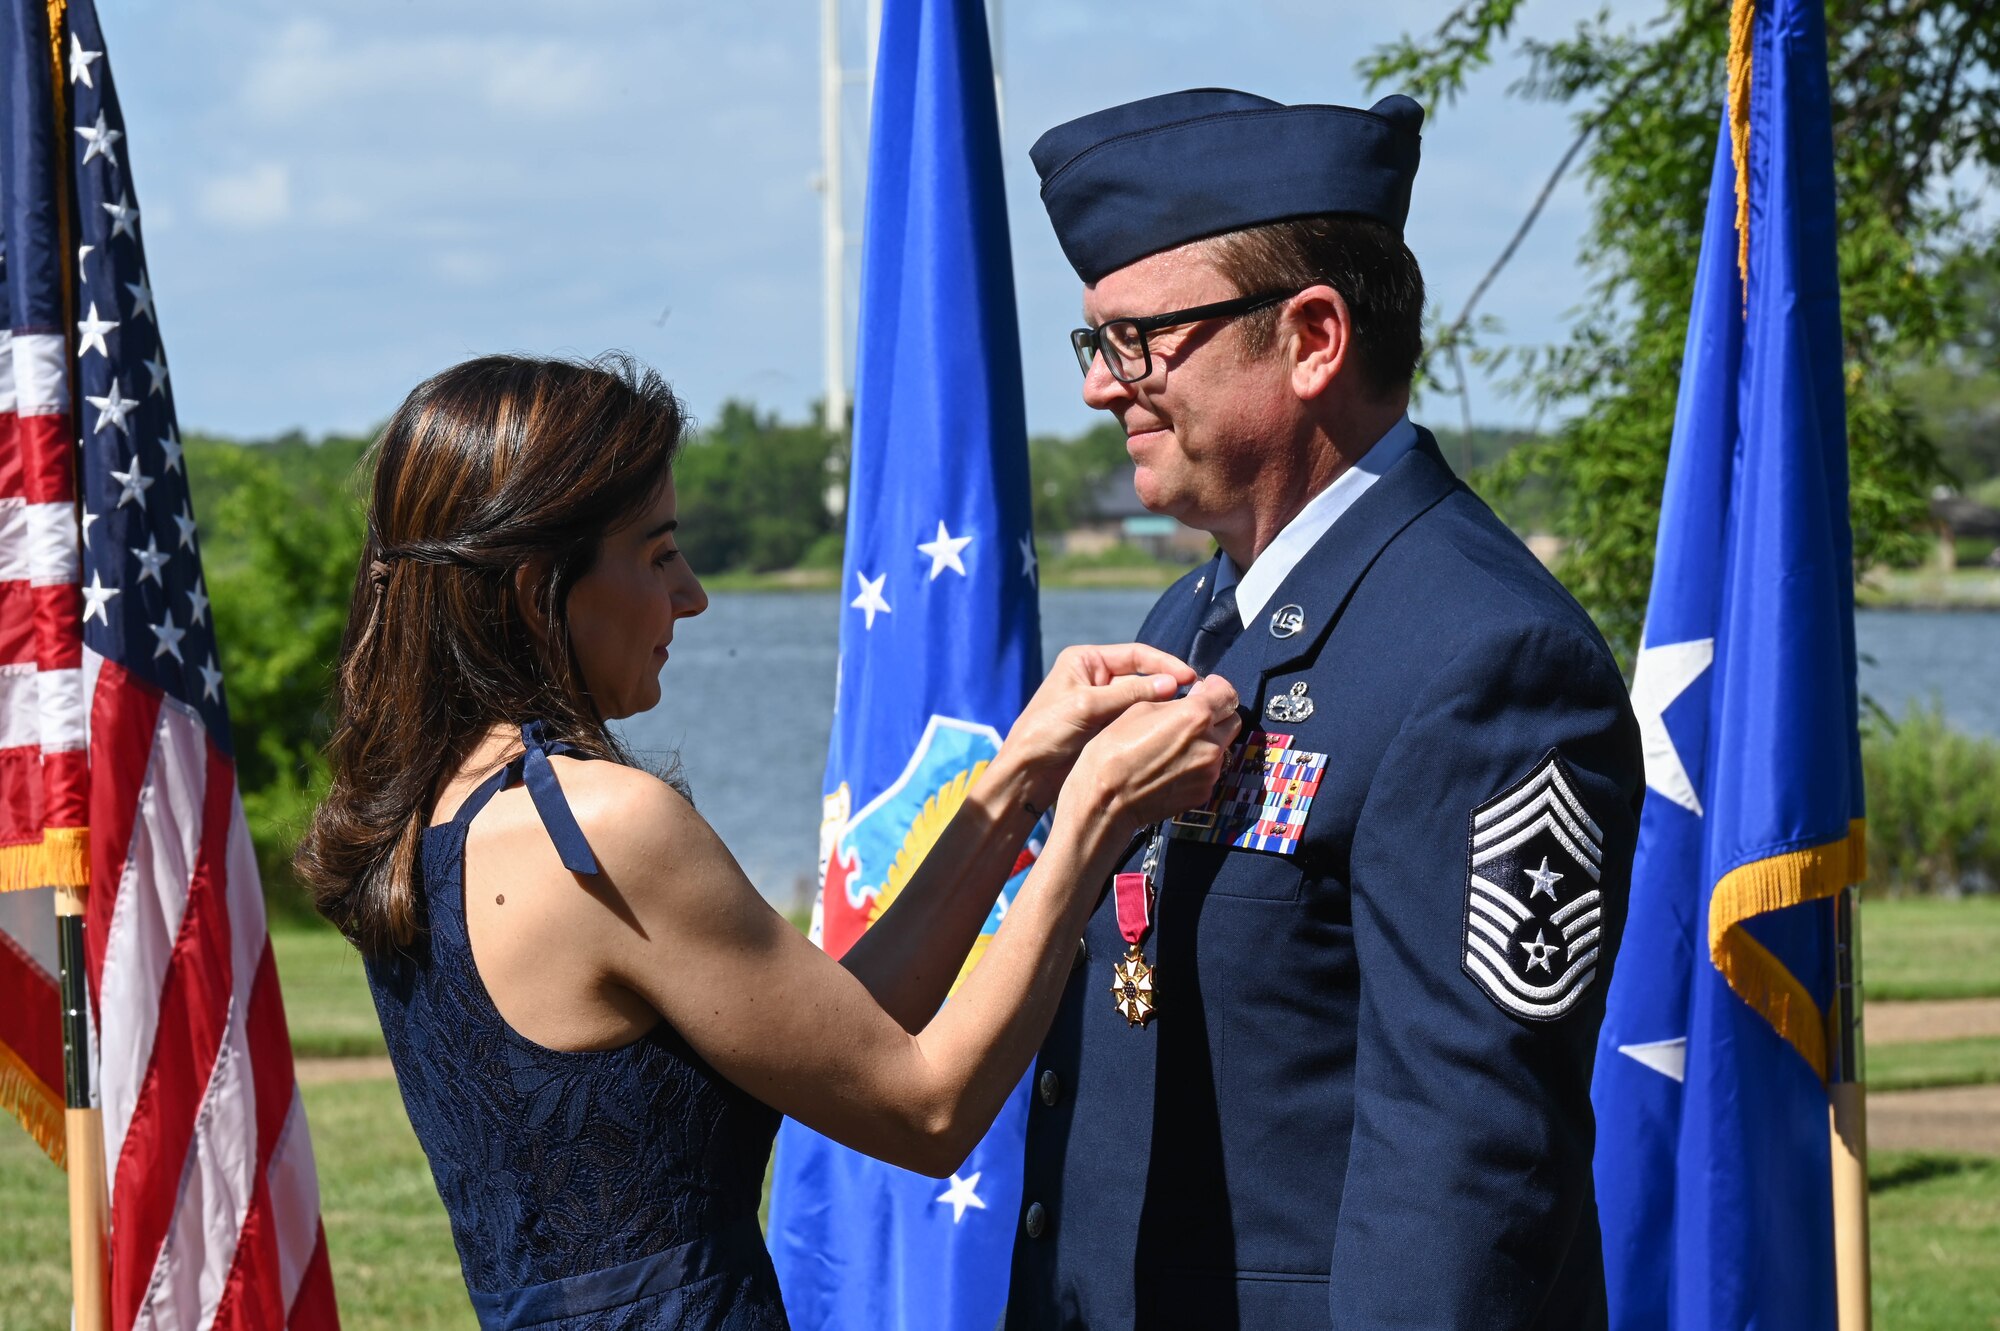 Command Chief of Air Combat Command, David Wade had his retirement ceremony on June 24, 2022, at Langley, AFB. Chief Wade will retire Nov. 1, 2022, after thirty years of service in the United States Air Force.